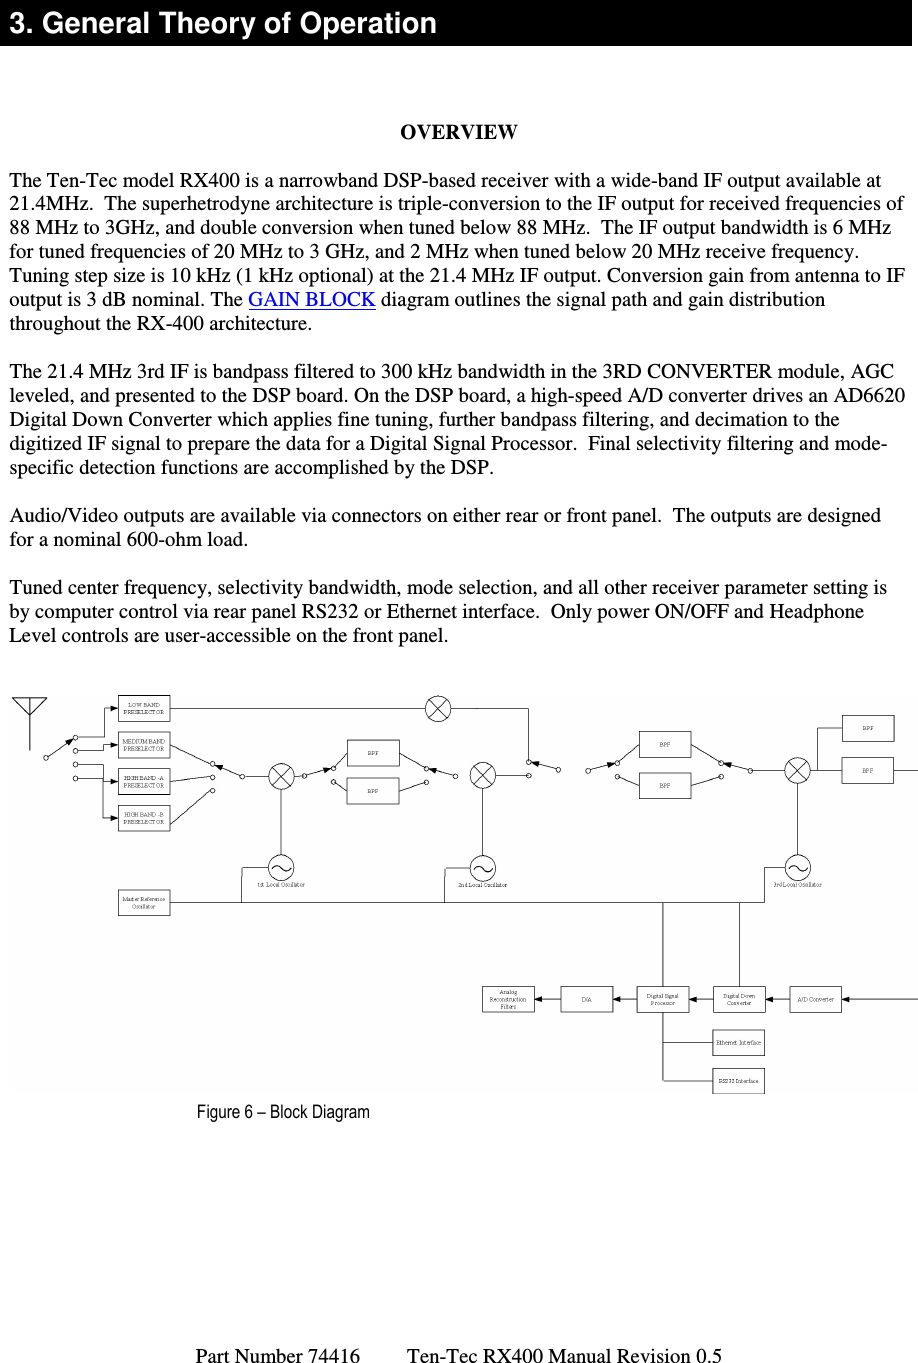 Part Number 74416         Ten-Tec RX400 Manual Revision 0.5   3. General Theory of Operation   OVERVIEW  The Ten-Tec model RX400 is a narrowband DSP-based receiver with a wide-band IF output available at 21.4MHz.  The superhetrodyne architecture is triple-conversion to the IF output for received frequencies of 88 MHz to 3GHz, and double conversion when tuned below 88 MHz.  The IF output bandwidth is 6 MHz for tuned frequencies of 20 MHz to 3 GHz, and 2 MHz when tuned below 20 MHz receive frequency.  Tuning step size is 10 kHz (1 kHz optional) at the 21.4 MHz IF output. Conversion gain from antenna to IF output is 3 dB nominal. The GAIN BLOCK diagram outlines the signal path and gain distribution throughout the RX-400 architecture.  The 21.4 MHz 3rd IF is bandpass filtered to 300 kHz bandwidth in the 3RD CONVERTER module, AGC leveled, and presented to the DSP board. On the DSP board, a high-speed A/D converter drives an AD6620 Digital Down Converter which applies fine tuning, further bandpass filtering, and decimation to the digitized IF signal to prepare the data for a Digital Signal Processor.  Final selectivity filtering and mode-specific detection functions are accomplished by the DSP.  Audio/Video outputs are available via connectors on either rear or front panel.  The outputs are designed for a nominal 600-ohm load.  Tuned center frequency, selectivity bandwidth, mode selection, and all other receiver parameter setting is by computer control via rear panel RS232 or Ethernet interface.  Only power ON/OFF and Headphone Level controls are user-accessible on the front panel.    Figure 6 – Block Diagram    